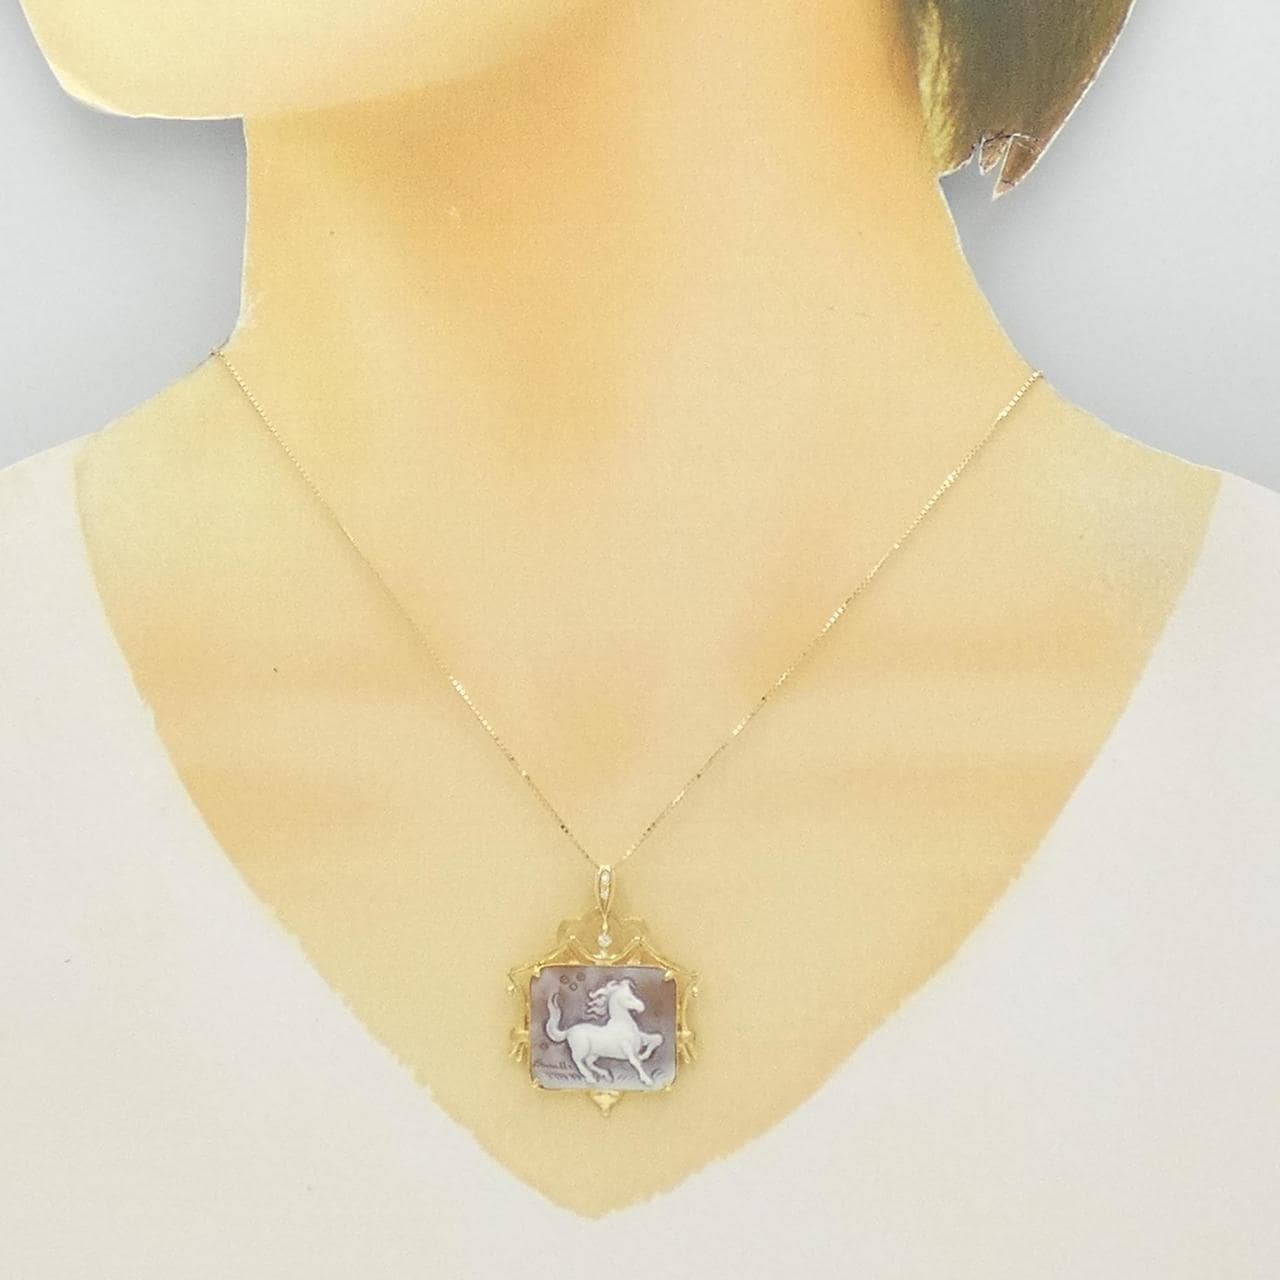 K18YG shell cameo necklace